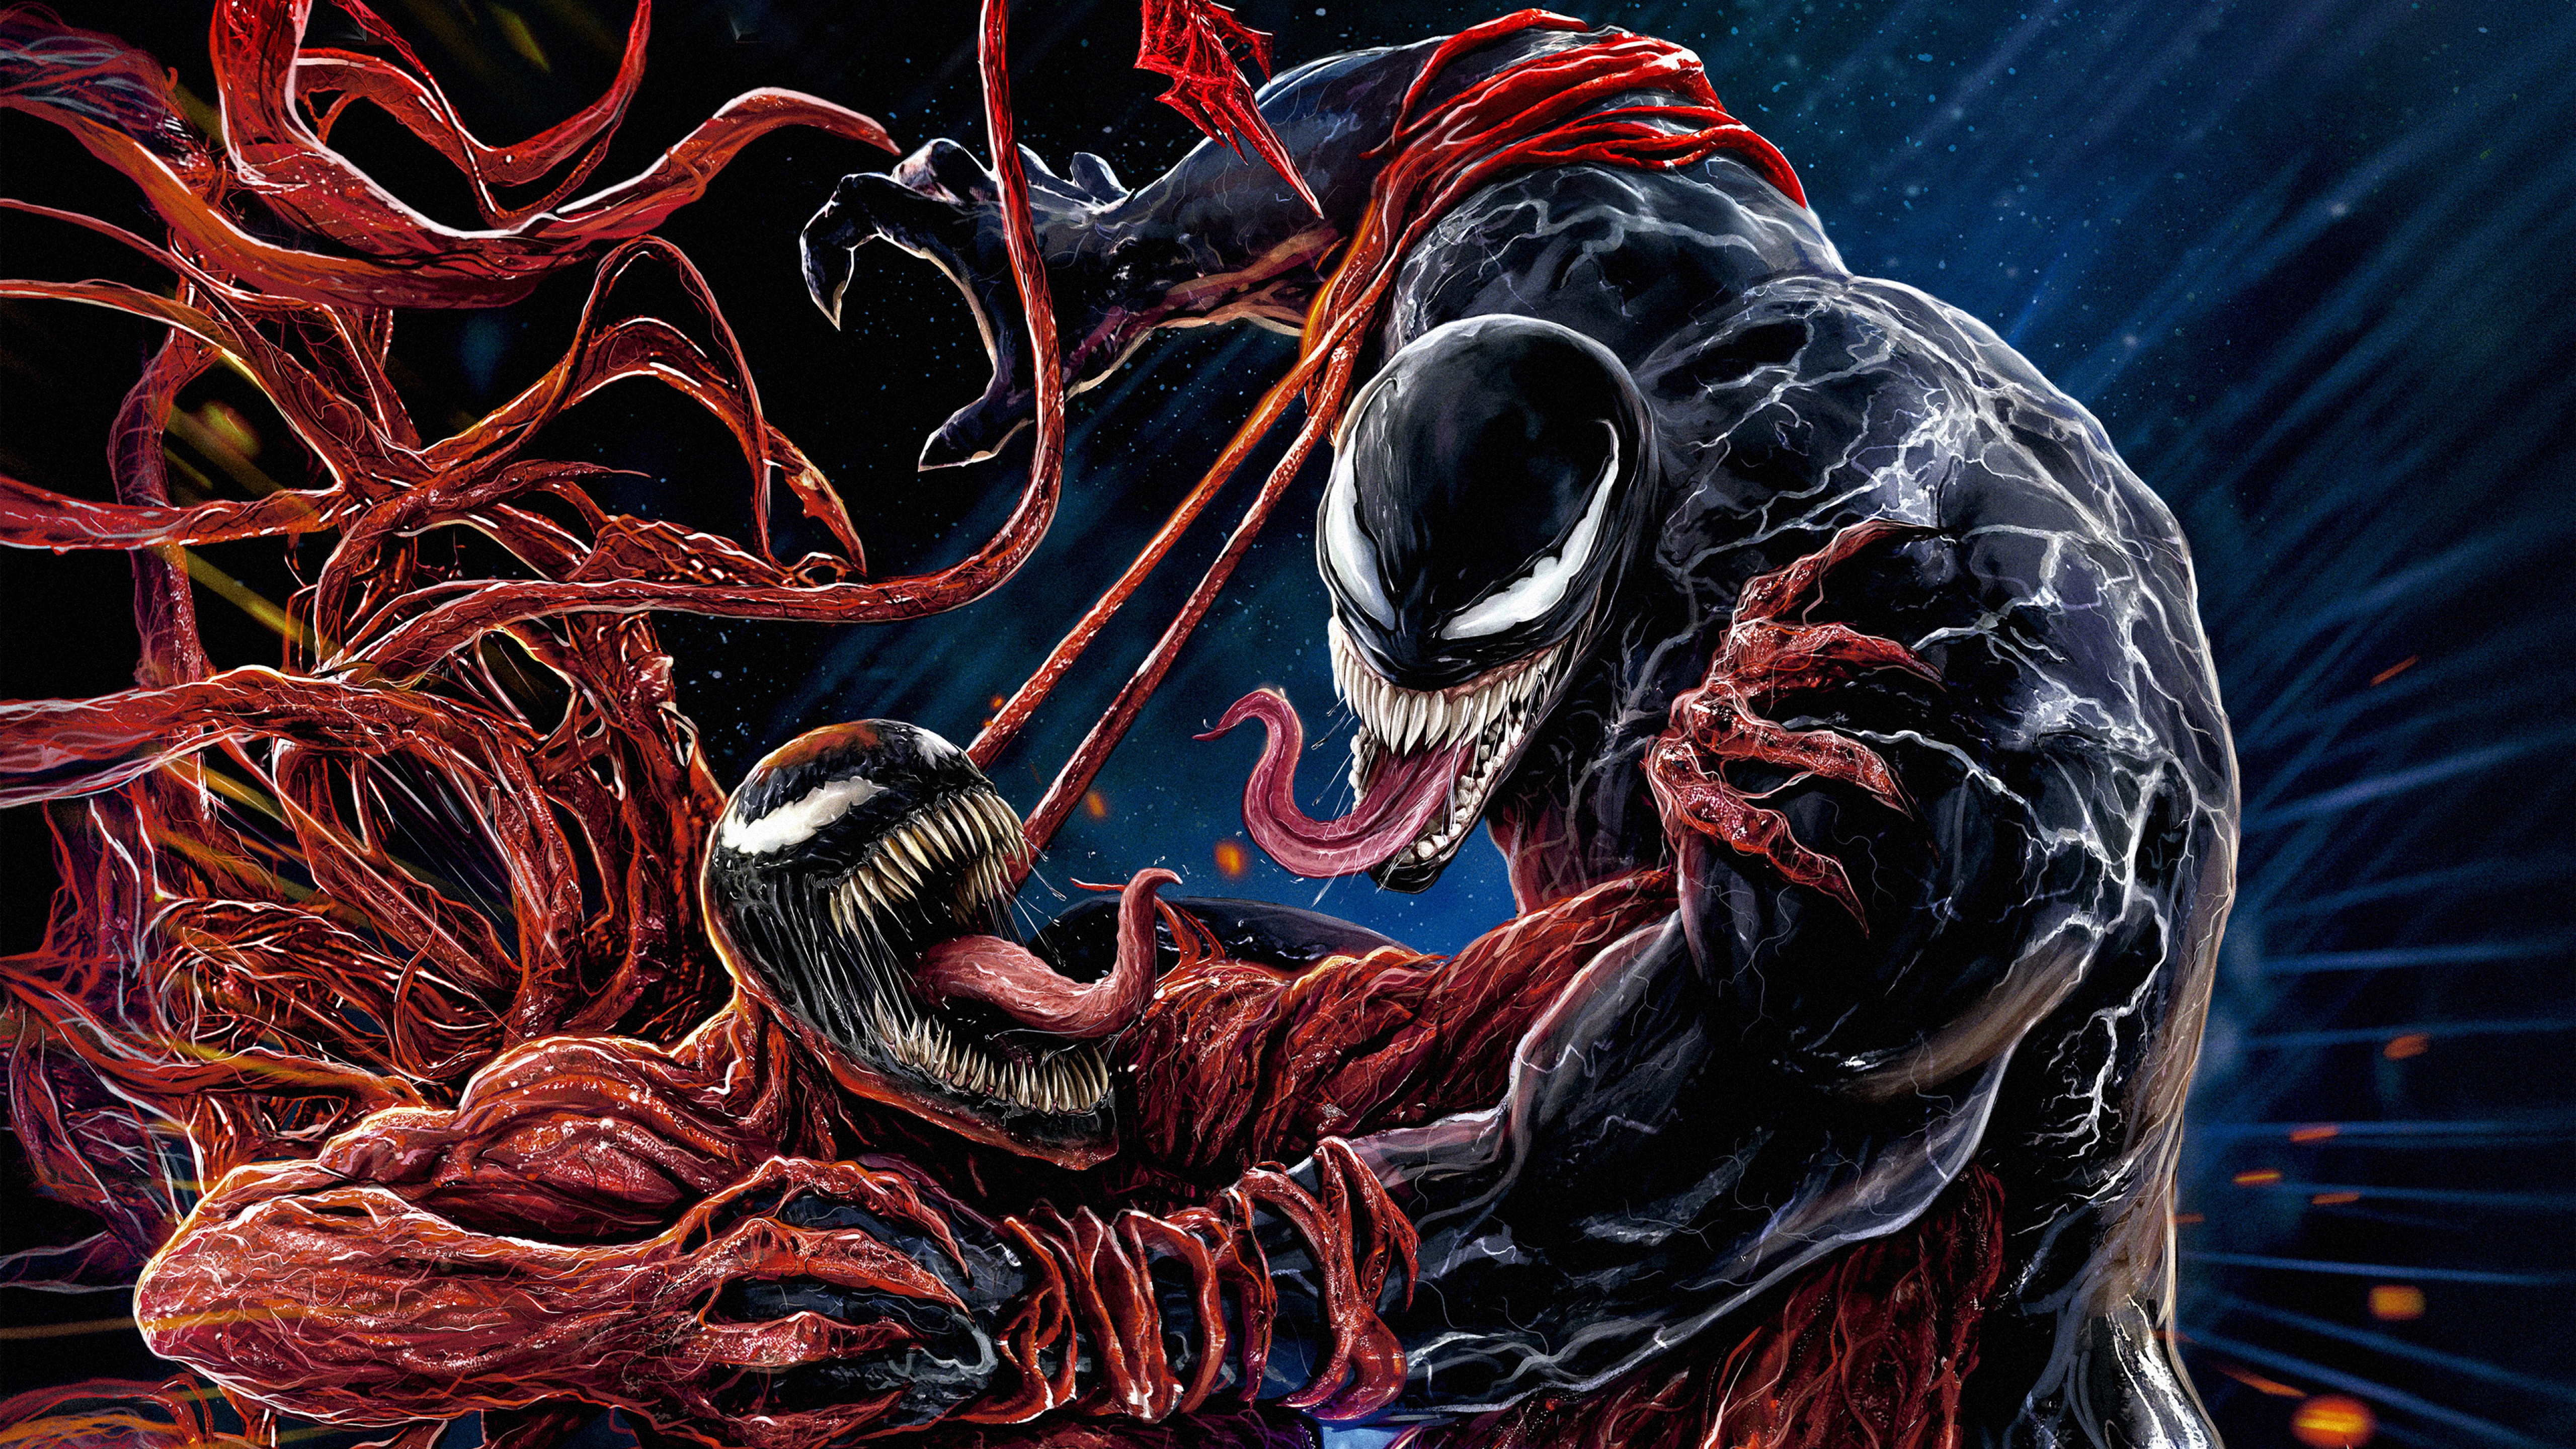 Venom Let There Be Carnage Wallpaper 4K 2021 Movies 6772